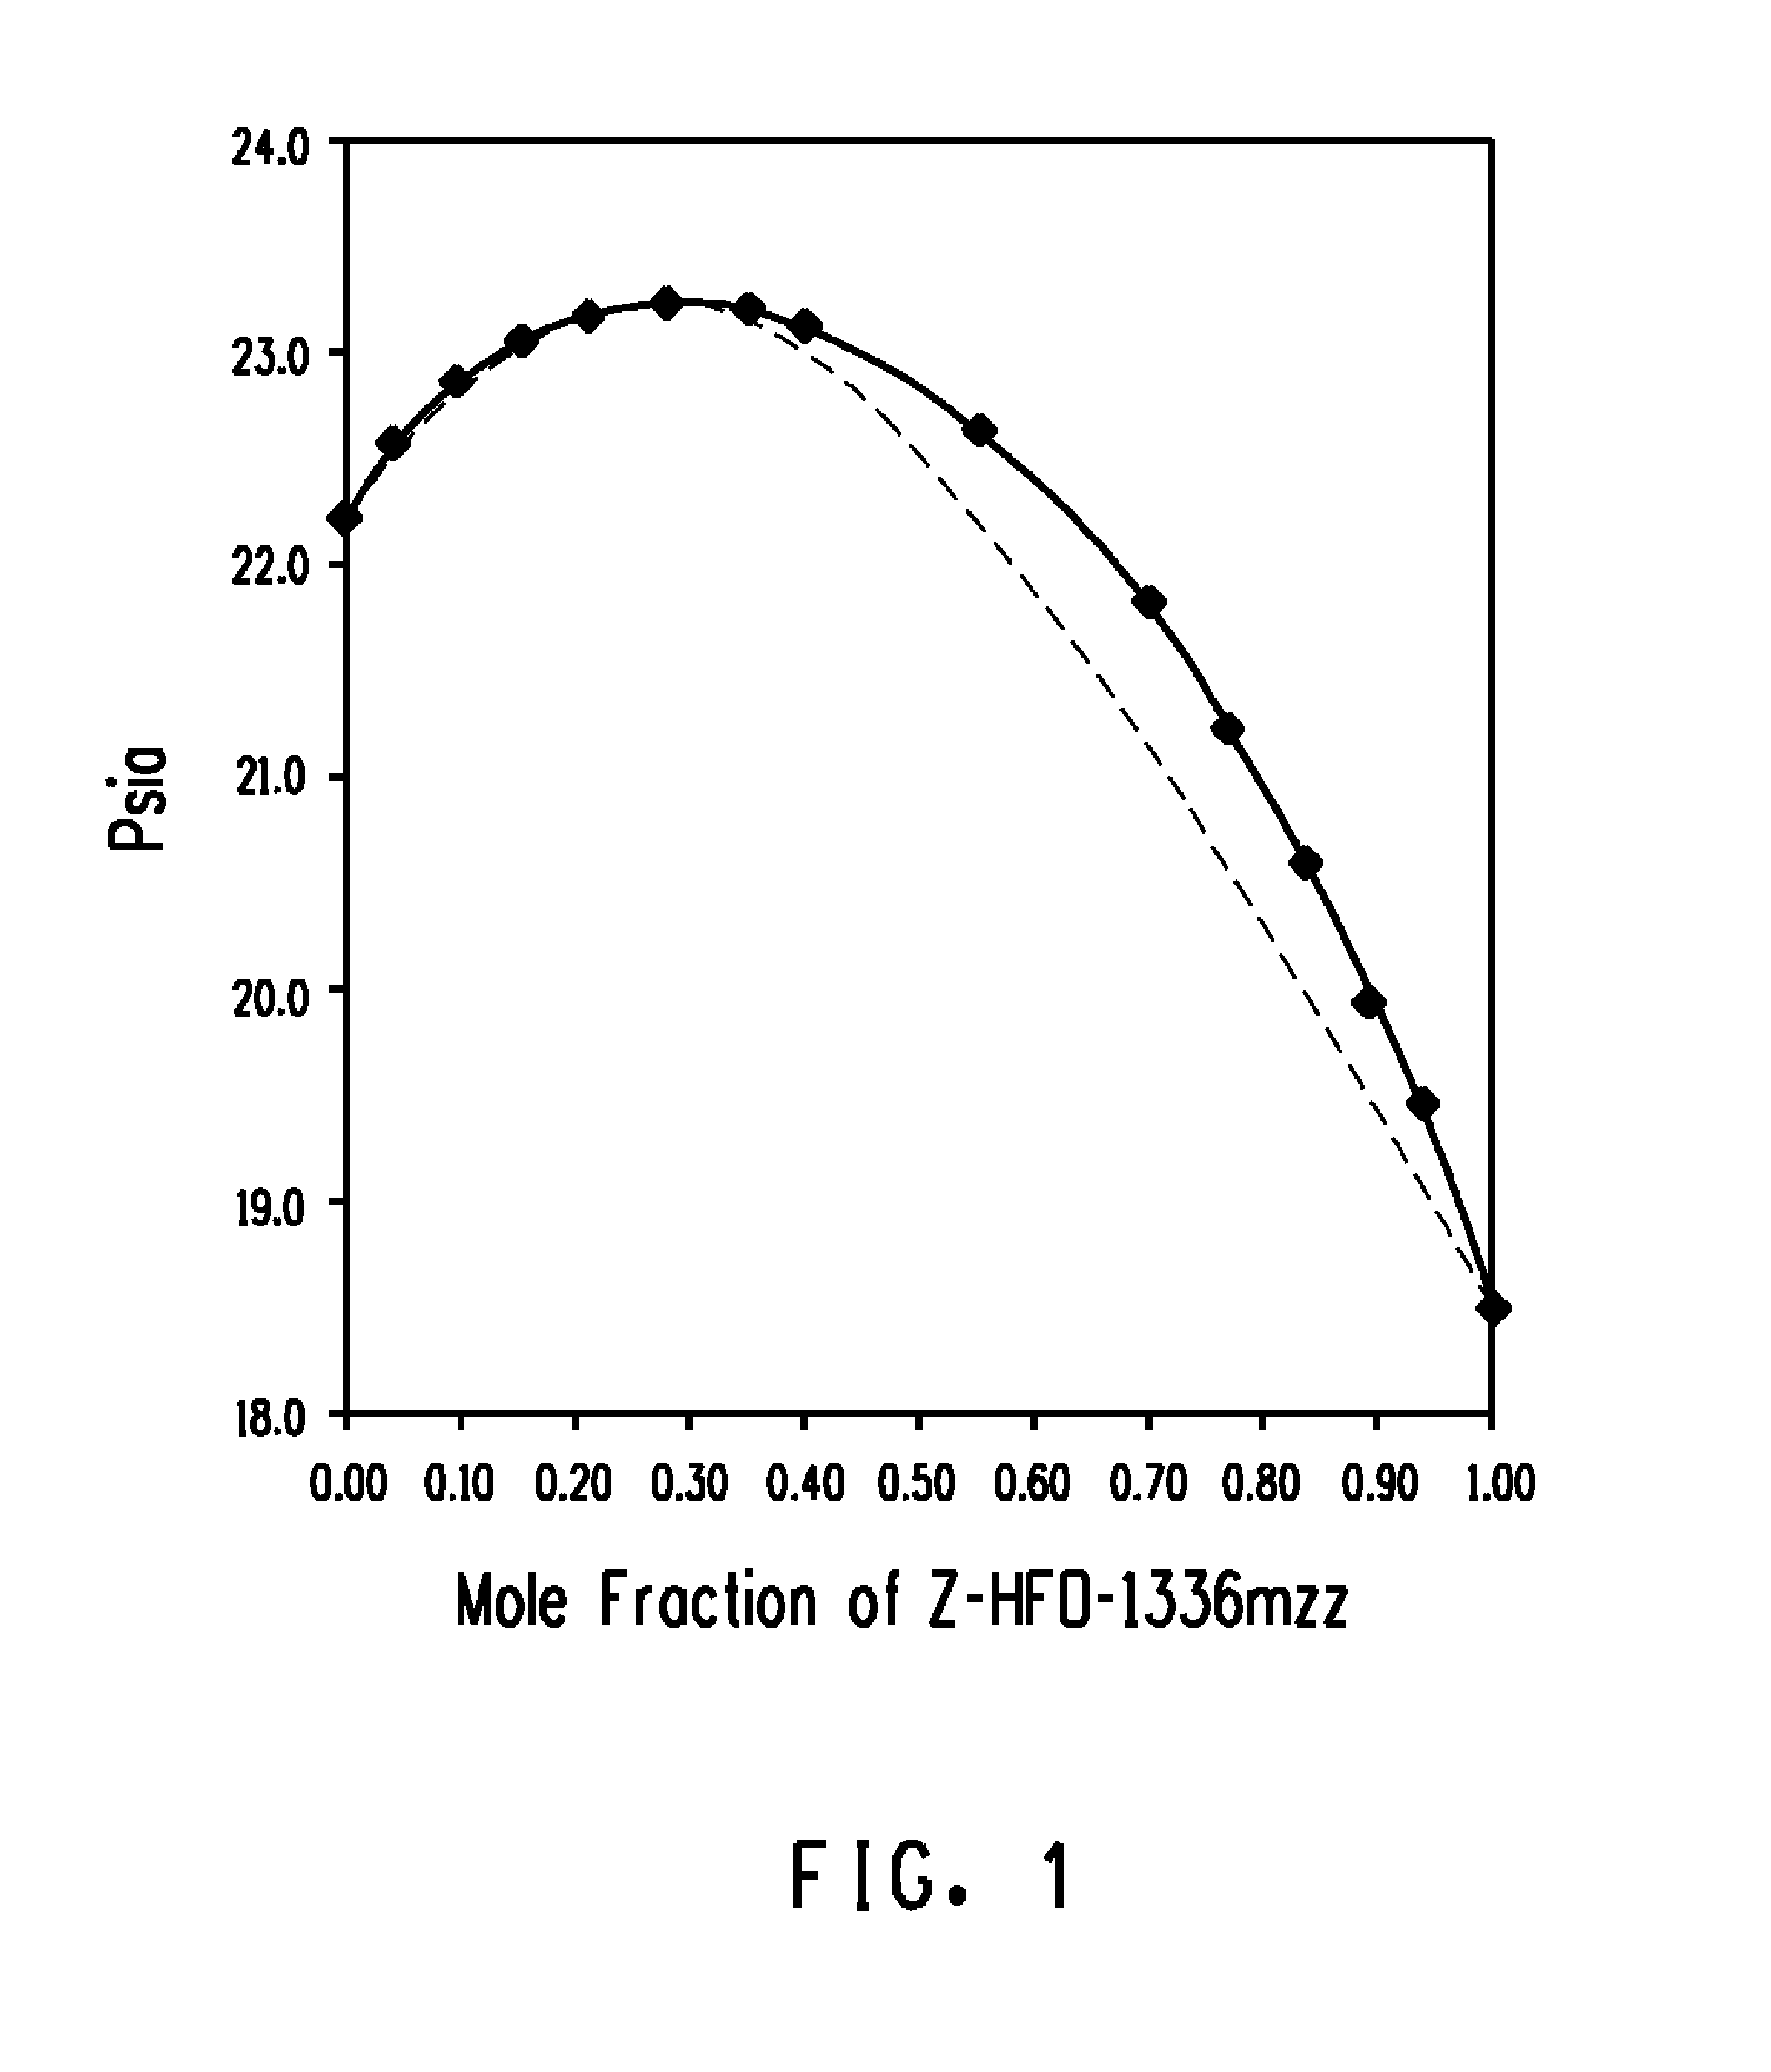 Compositions comprising z-1,1,1,4,4,4-hexafluoro-2-butene and 2,2-dichloro-1,1,1-trifluoroethane and methods of use thereof